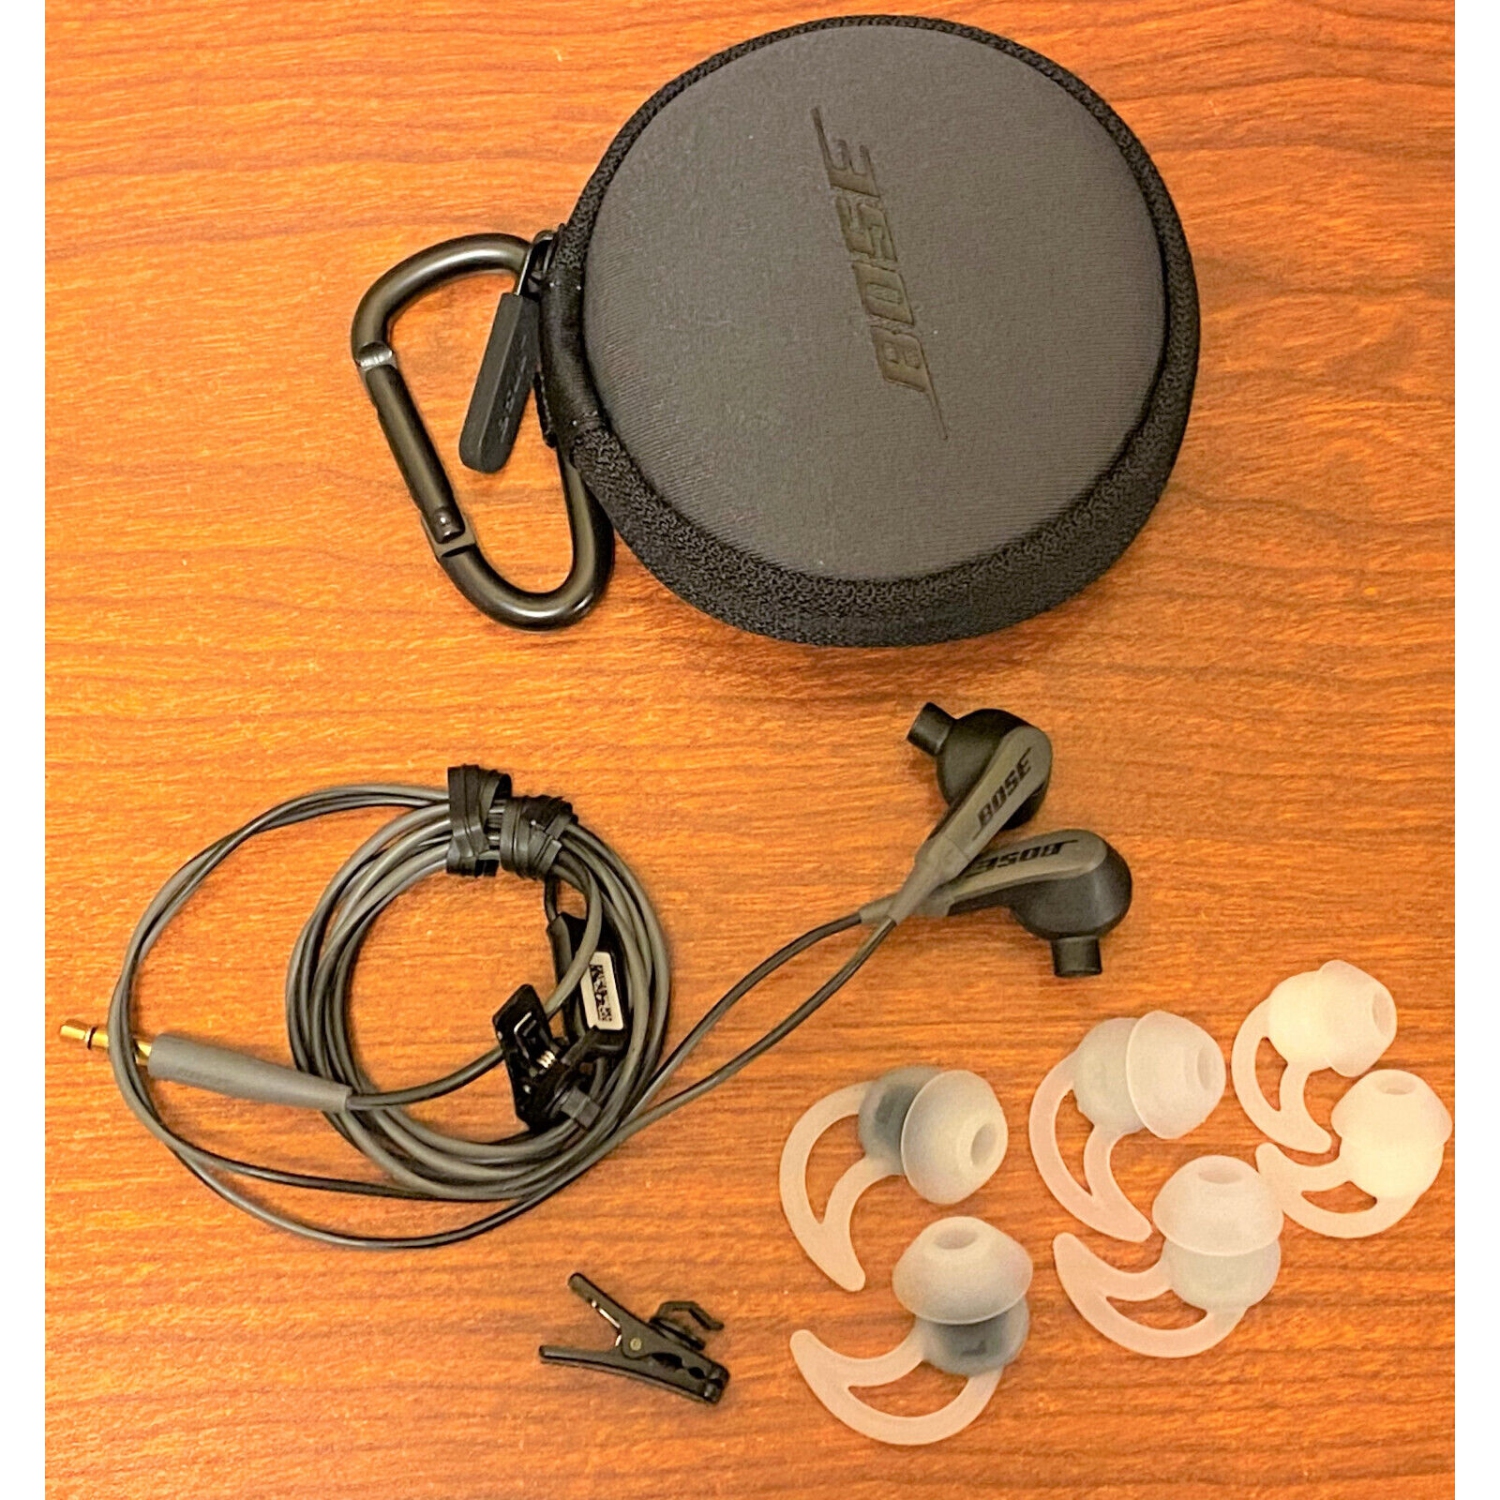 Refurbished Bose SoundSport In-Ear Headphones - Apple Devices, Charcoal